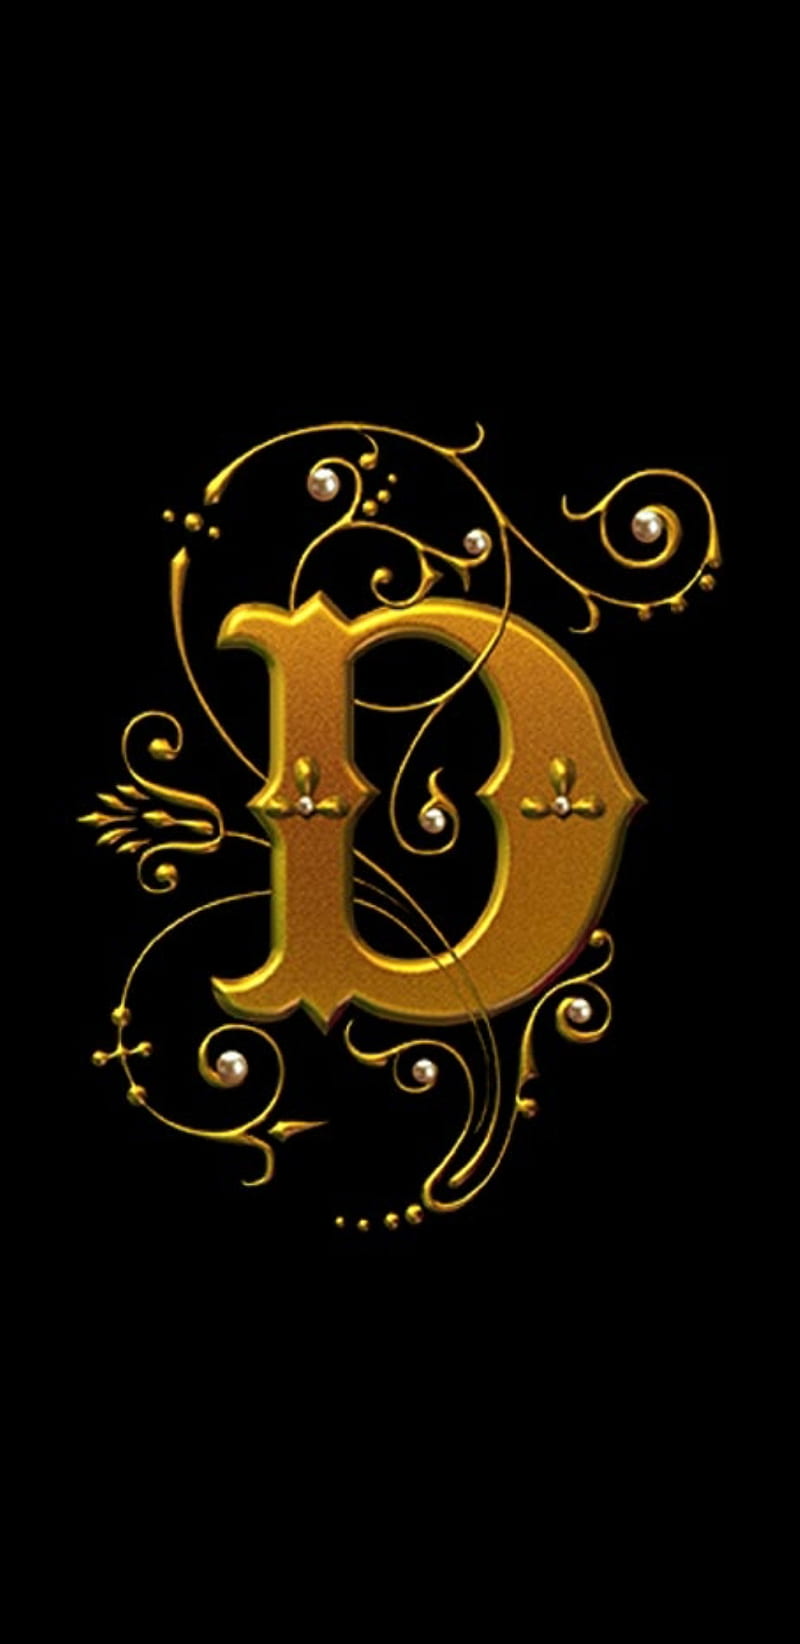 Letter d wallpaper by Paanpe - Download on ZEDGE™ | 8534